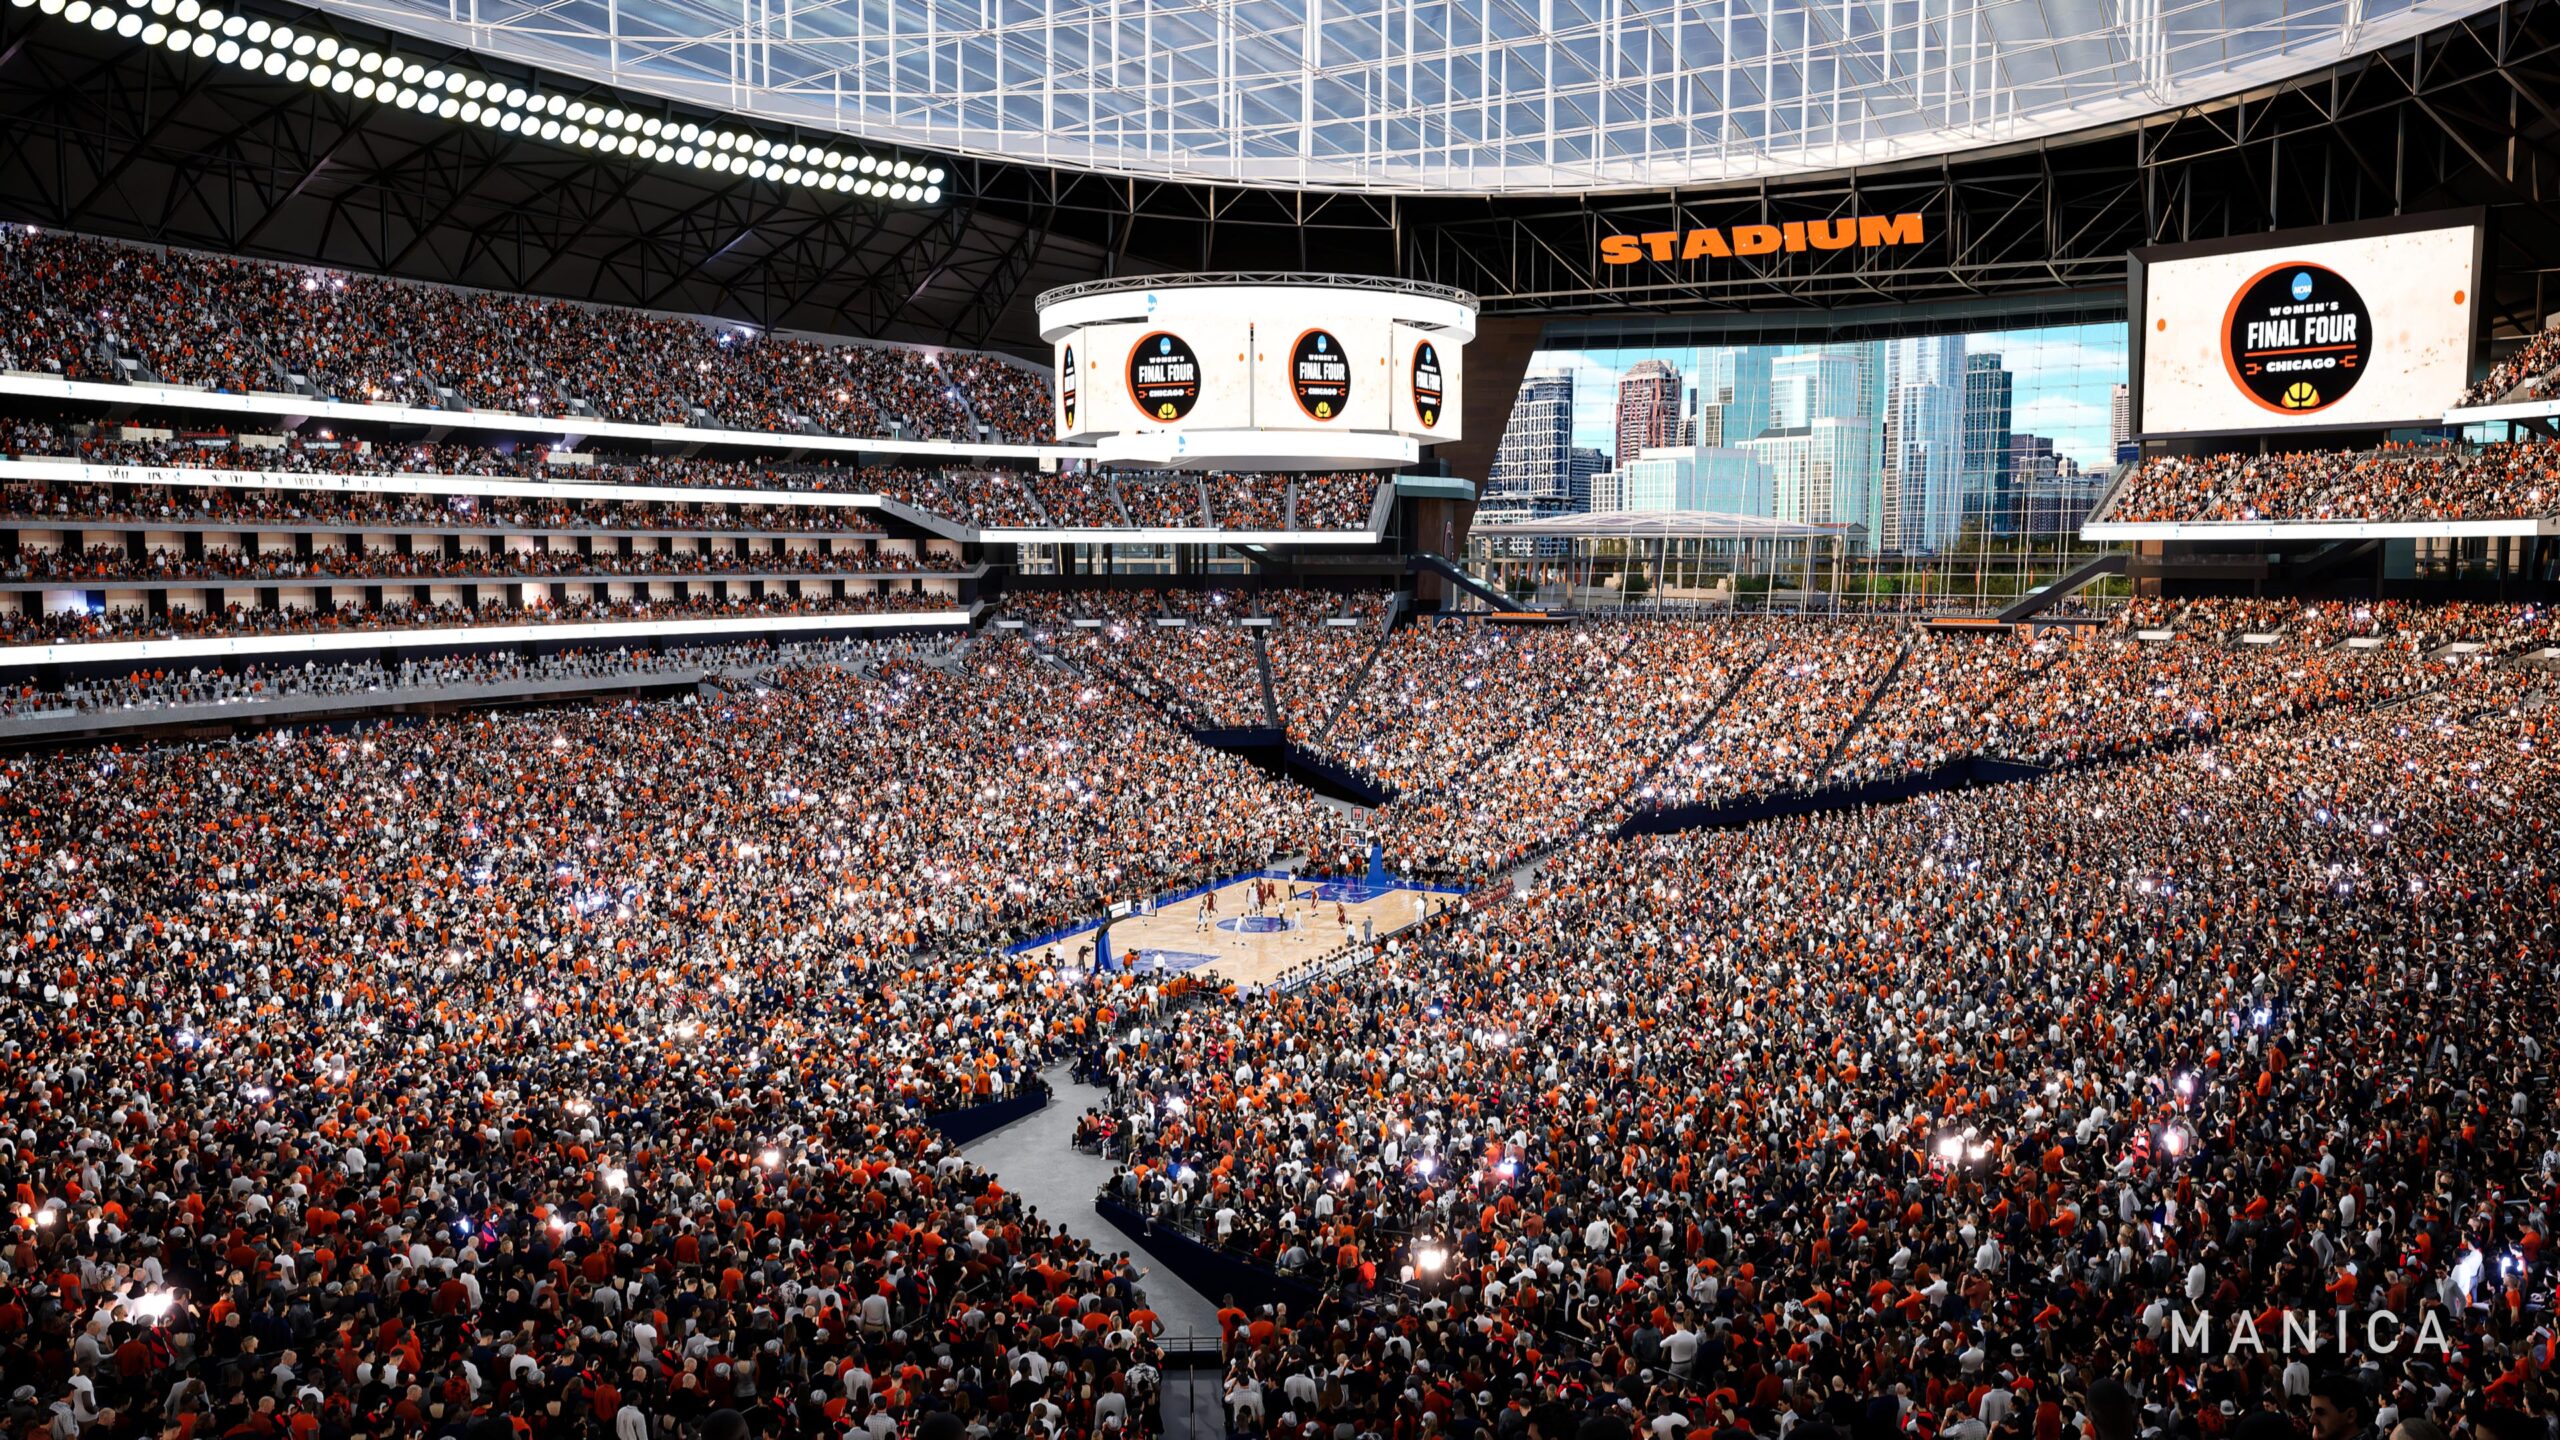 Renderings of a new state-of-the-art enclosed stadium with open space...